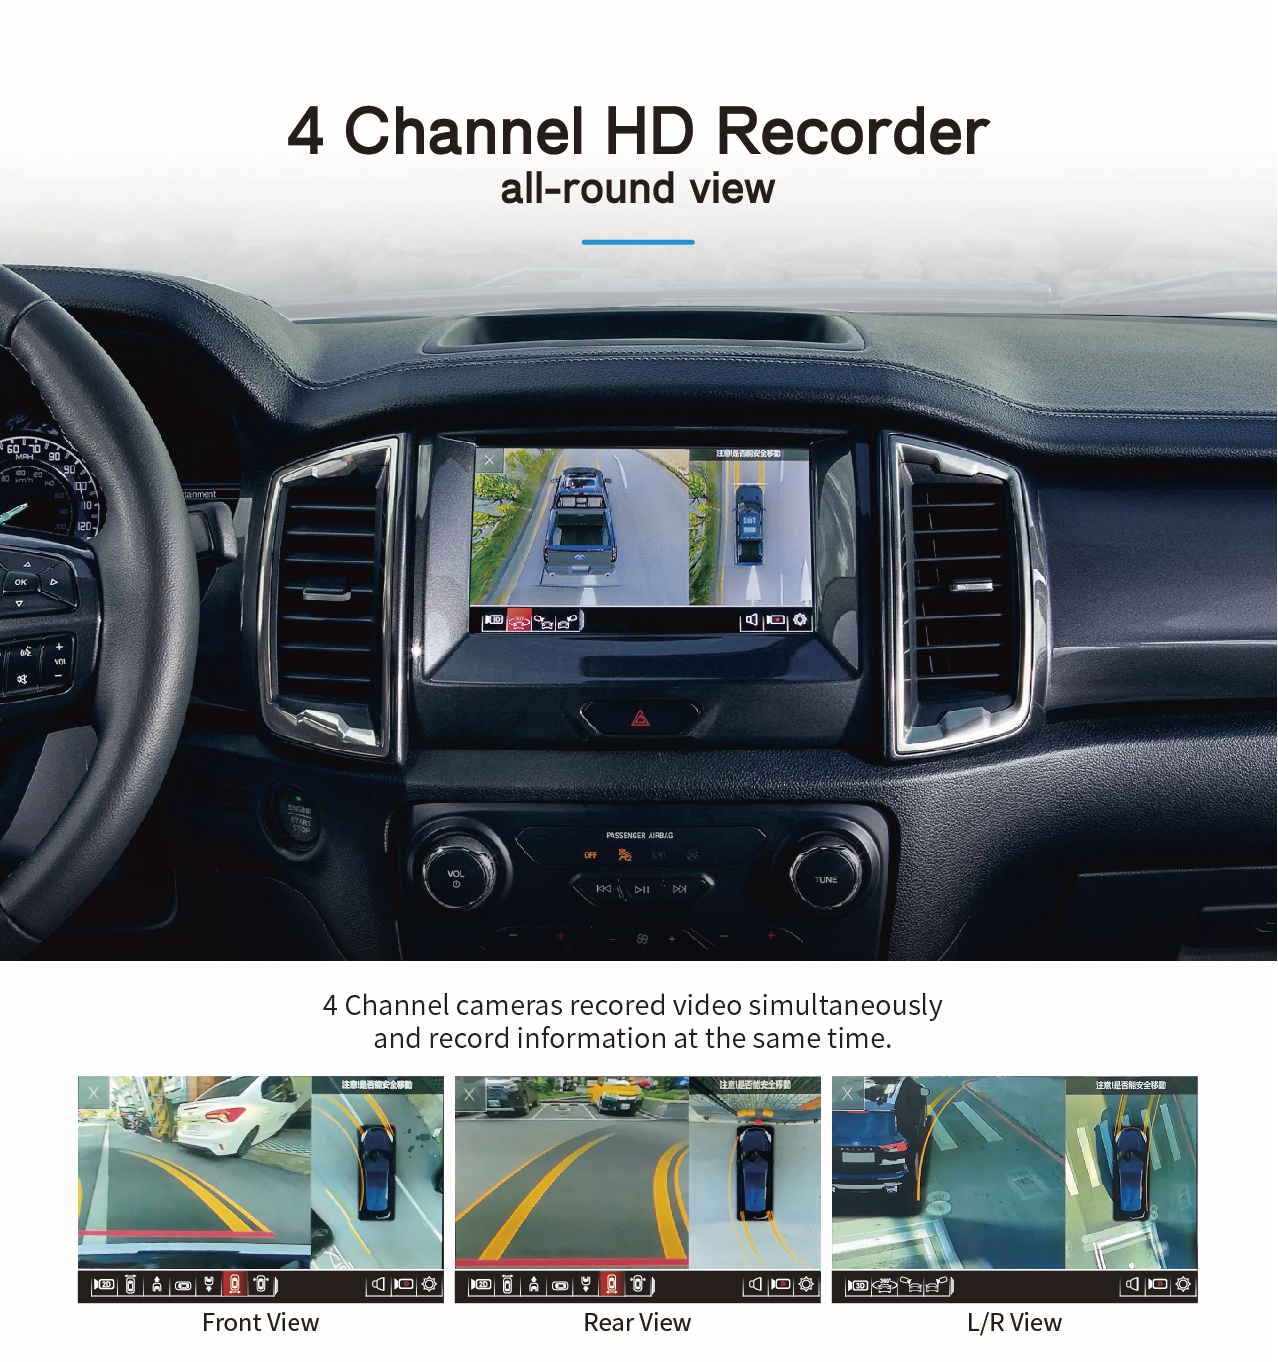 4 Channel HD Recorder all-round view